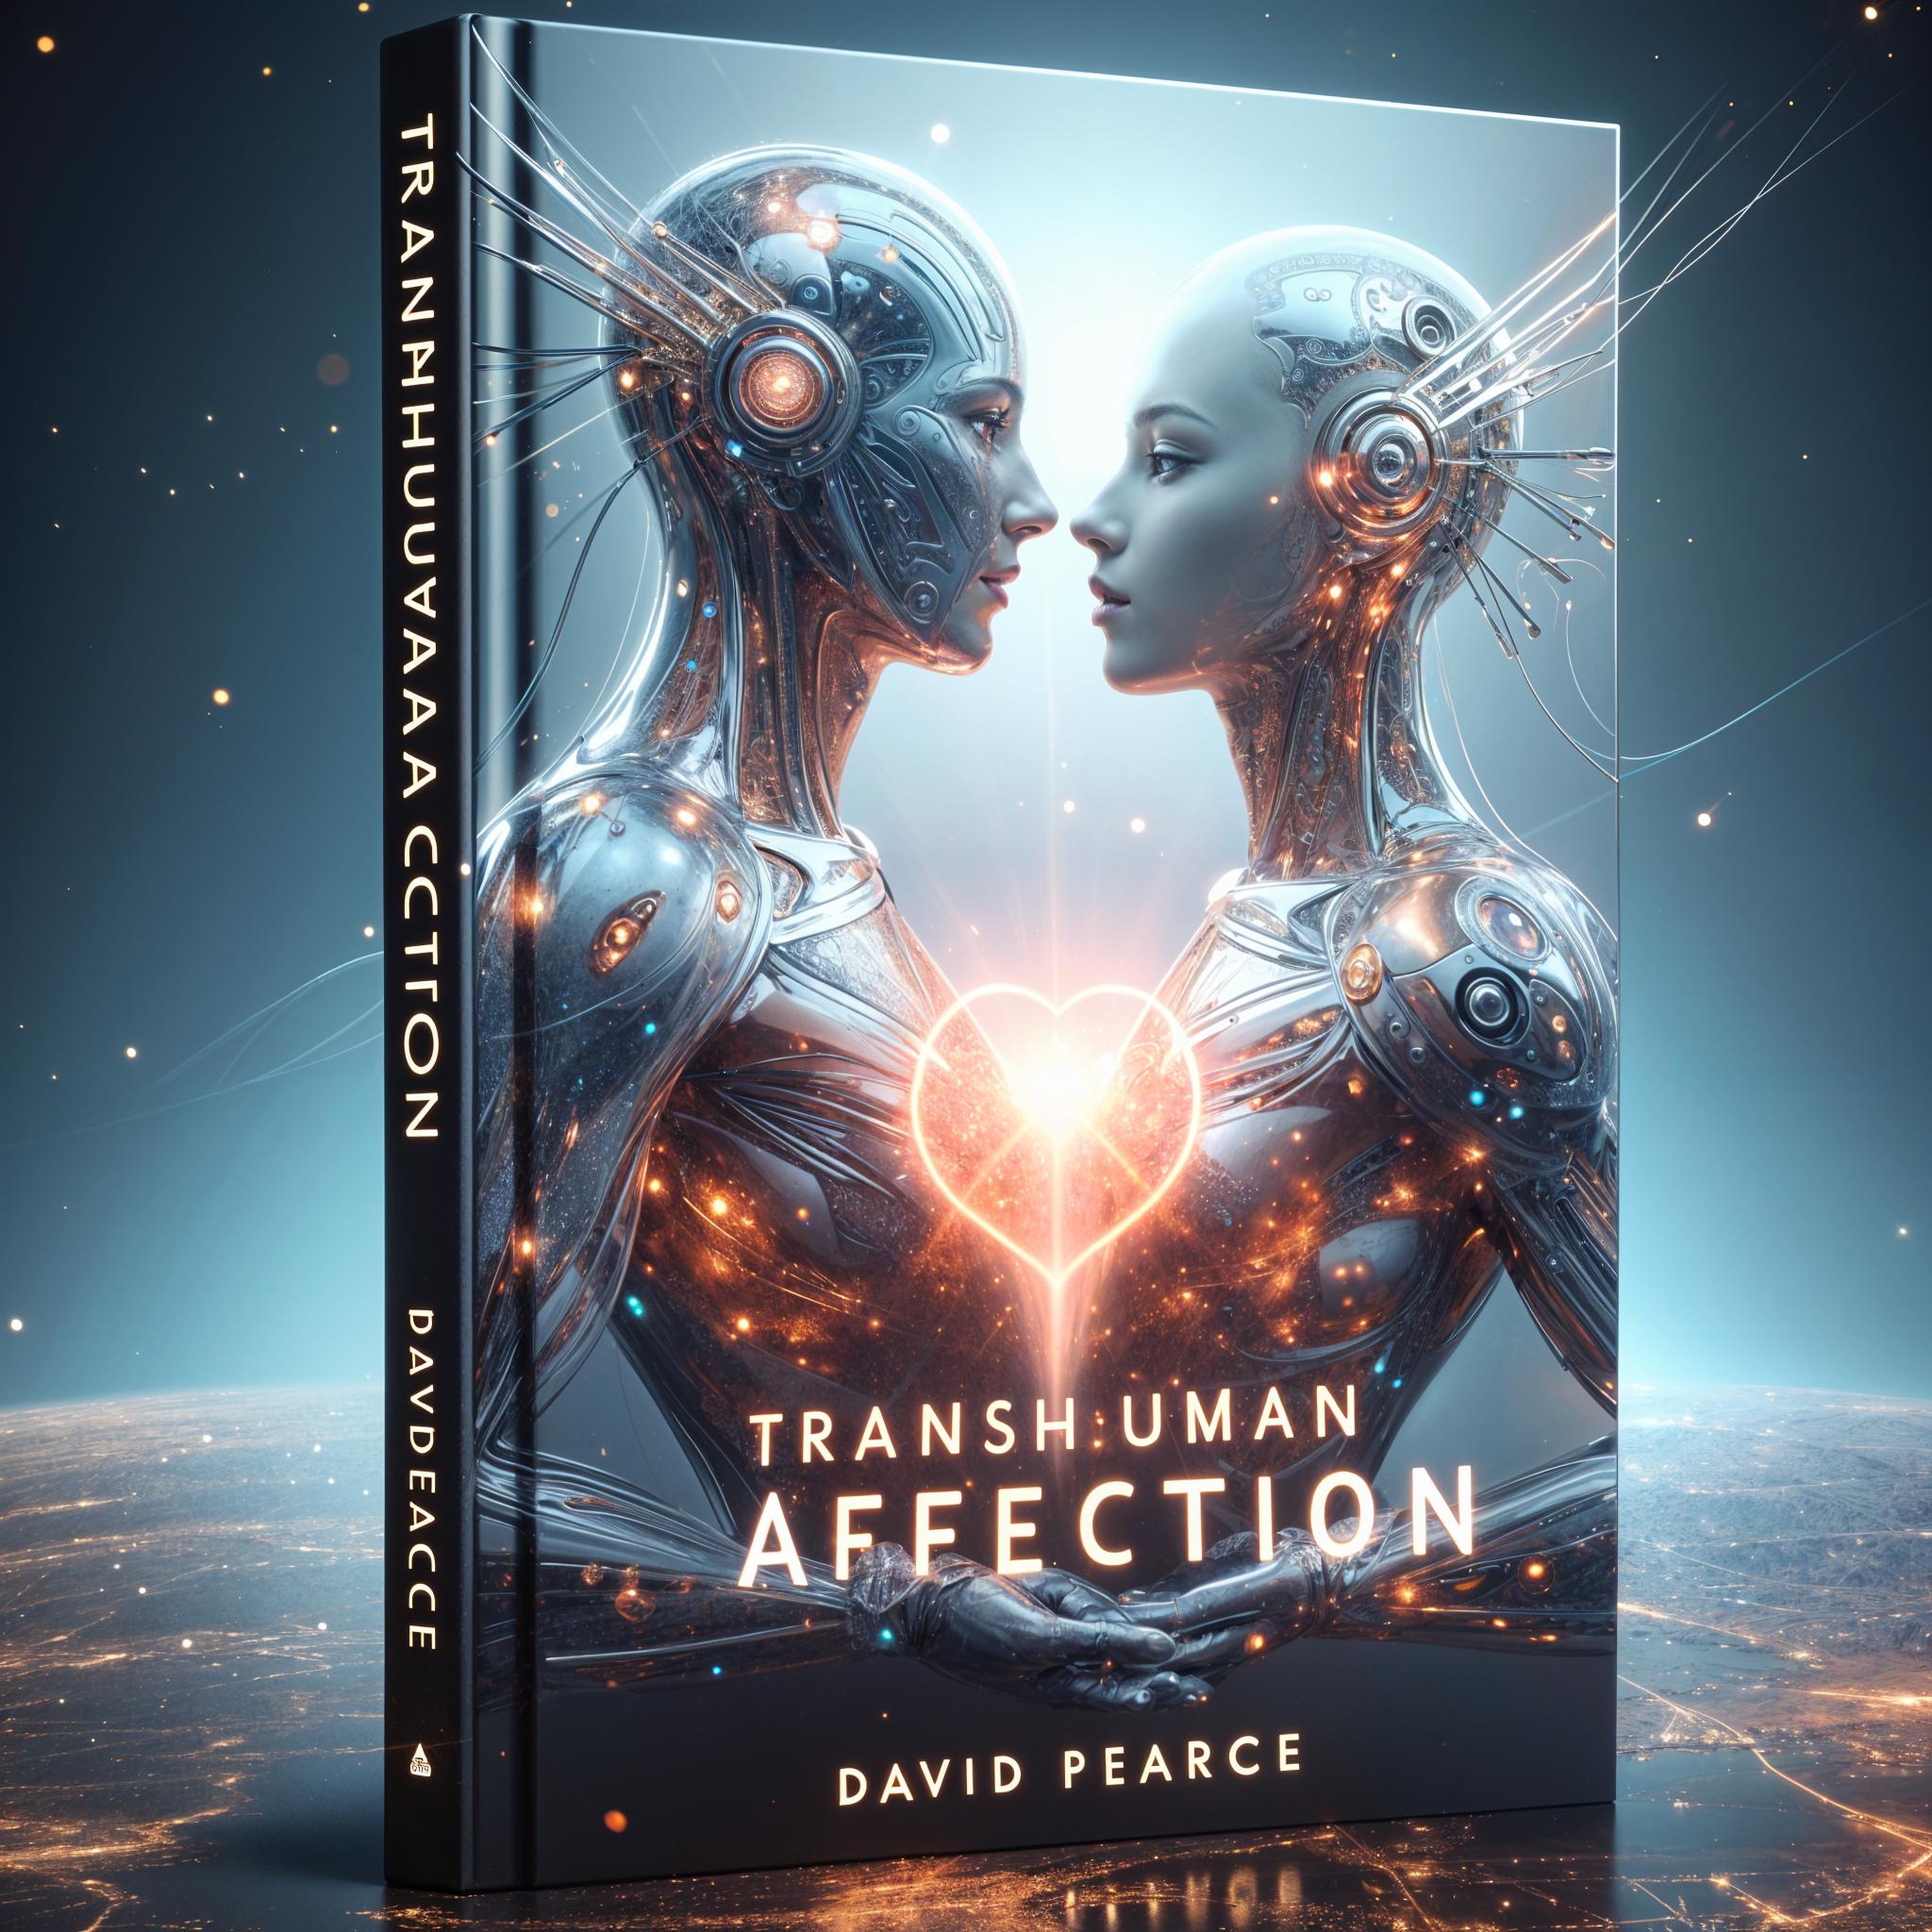 Affection by David Pearce